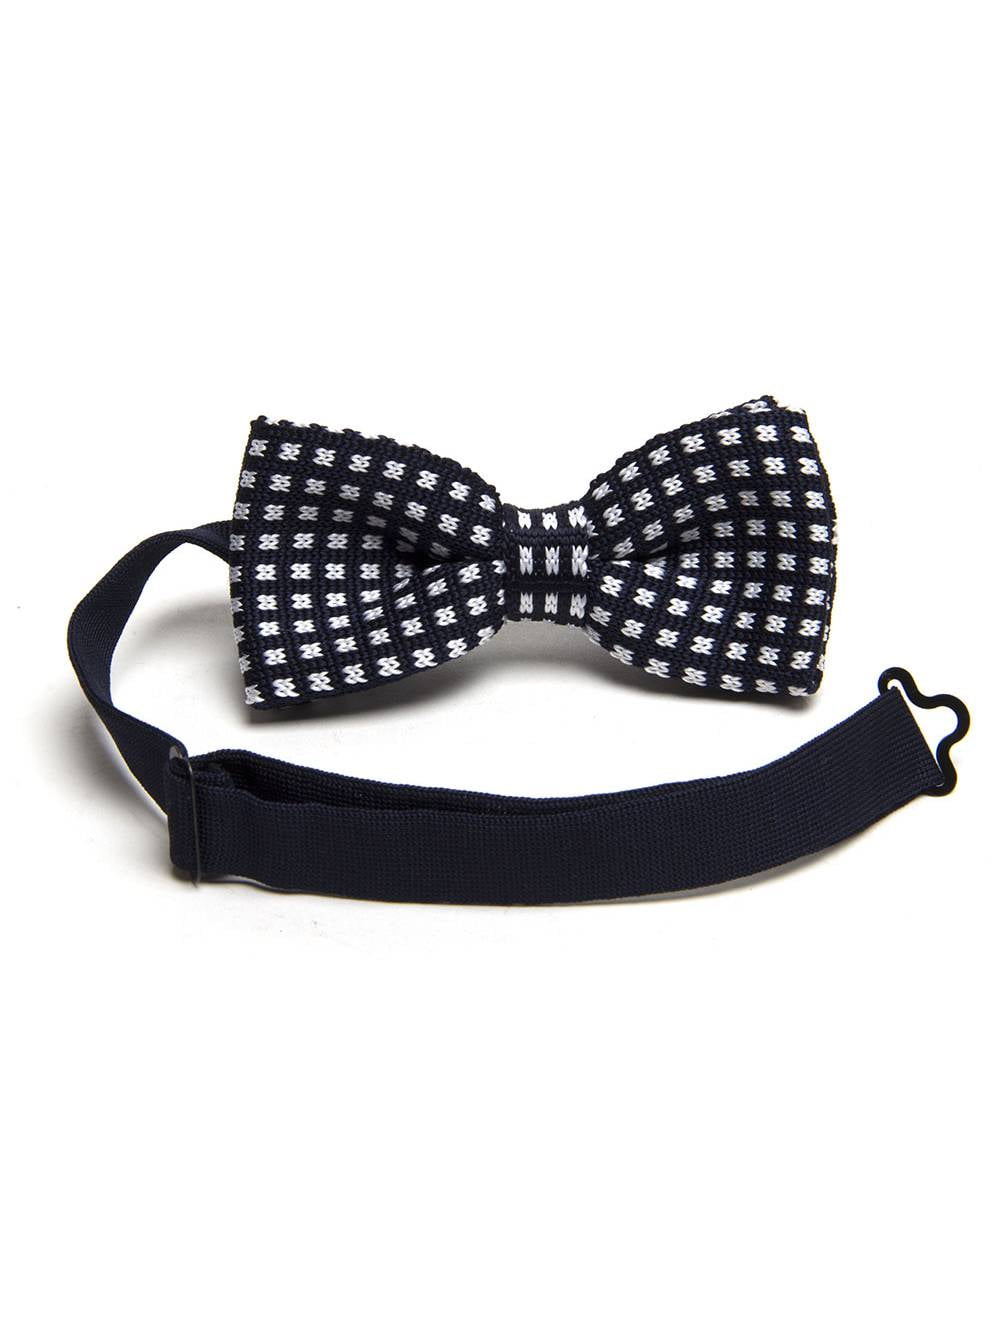 Men's Fashion Double Layer Solid Bowtie Knit Knitted Pre Tied Bow Tie Woven 